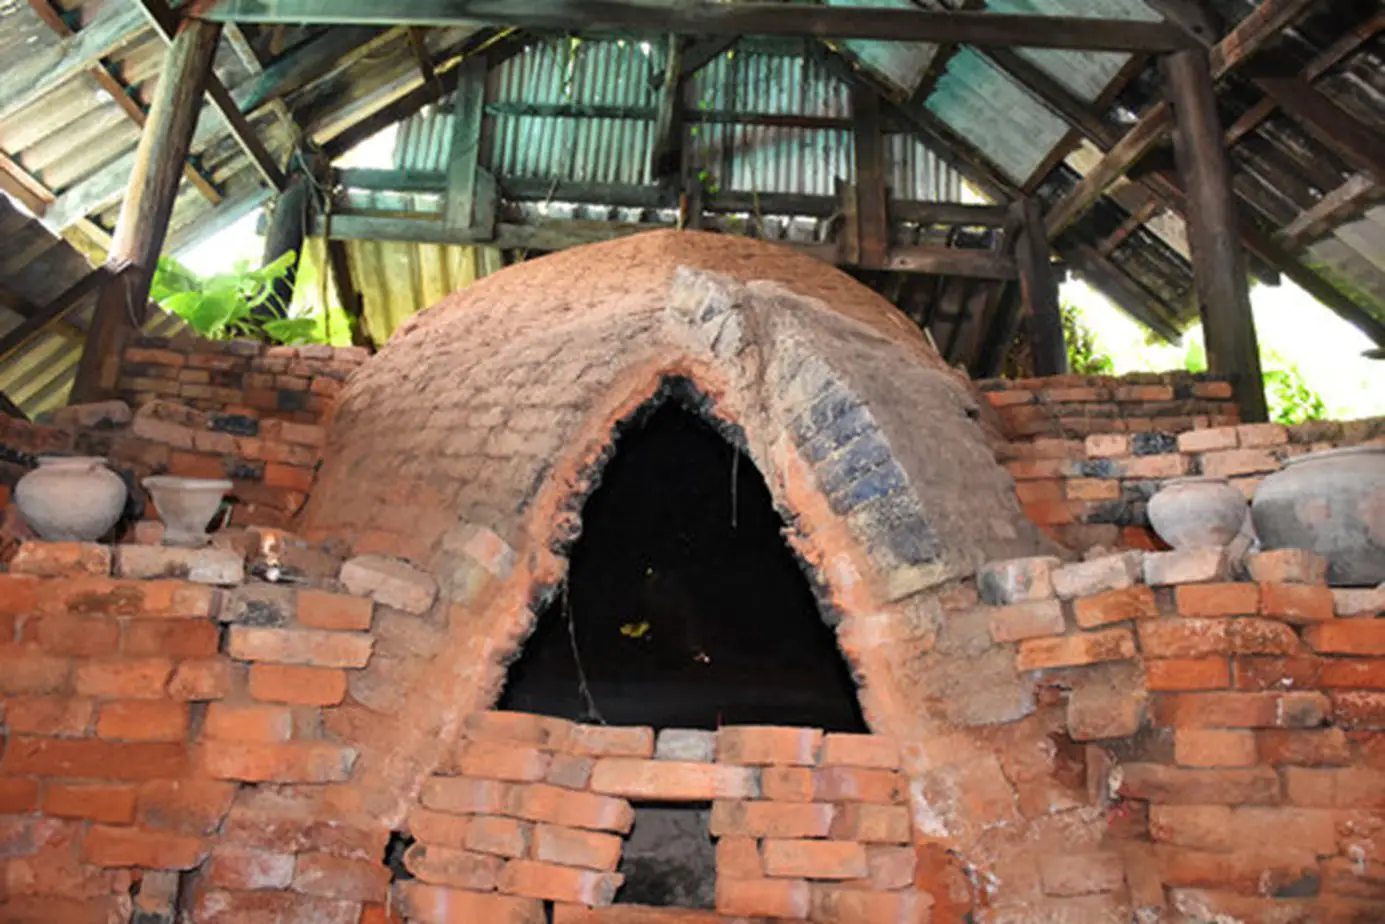 How To Make Your Own Brick Kiln?